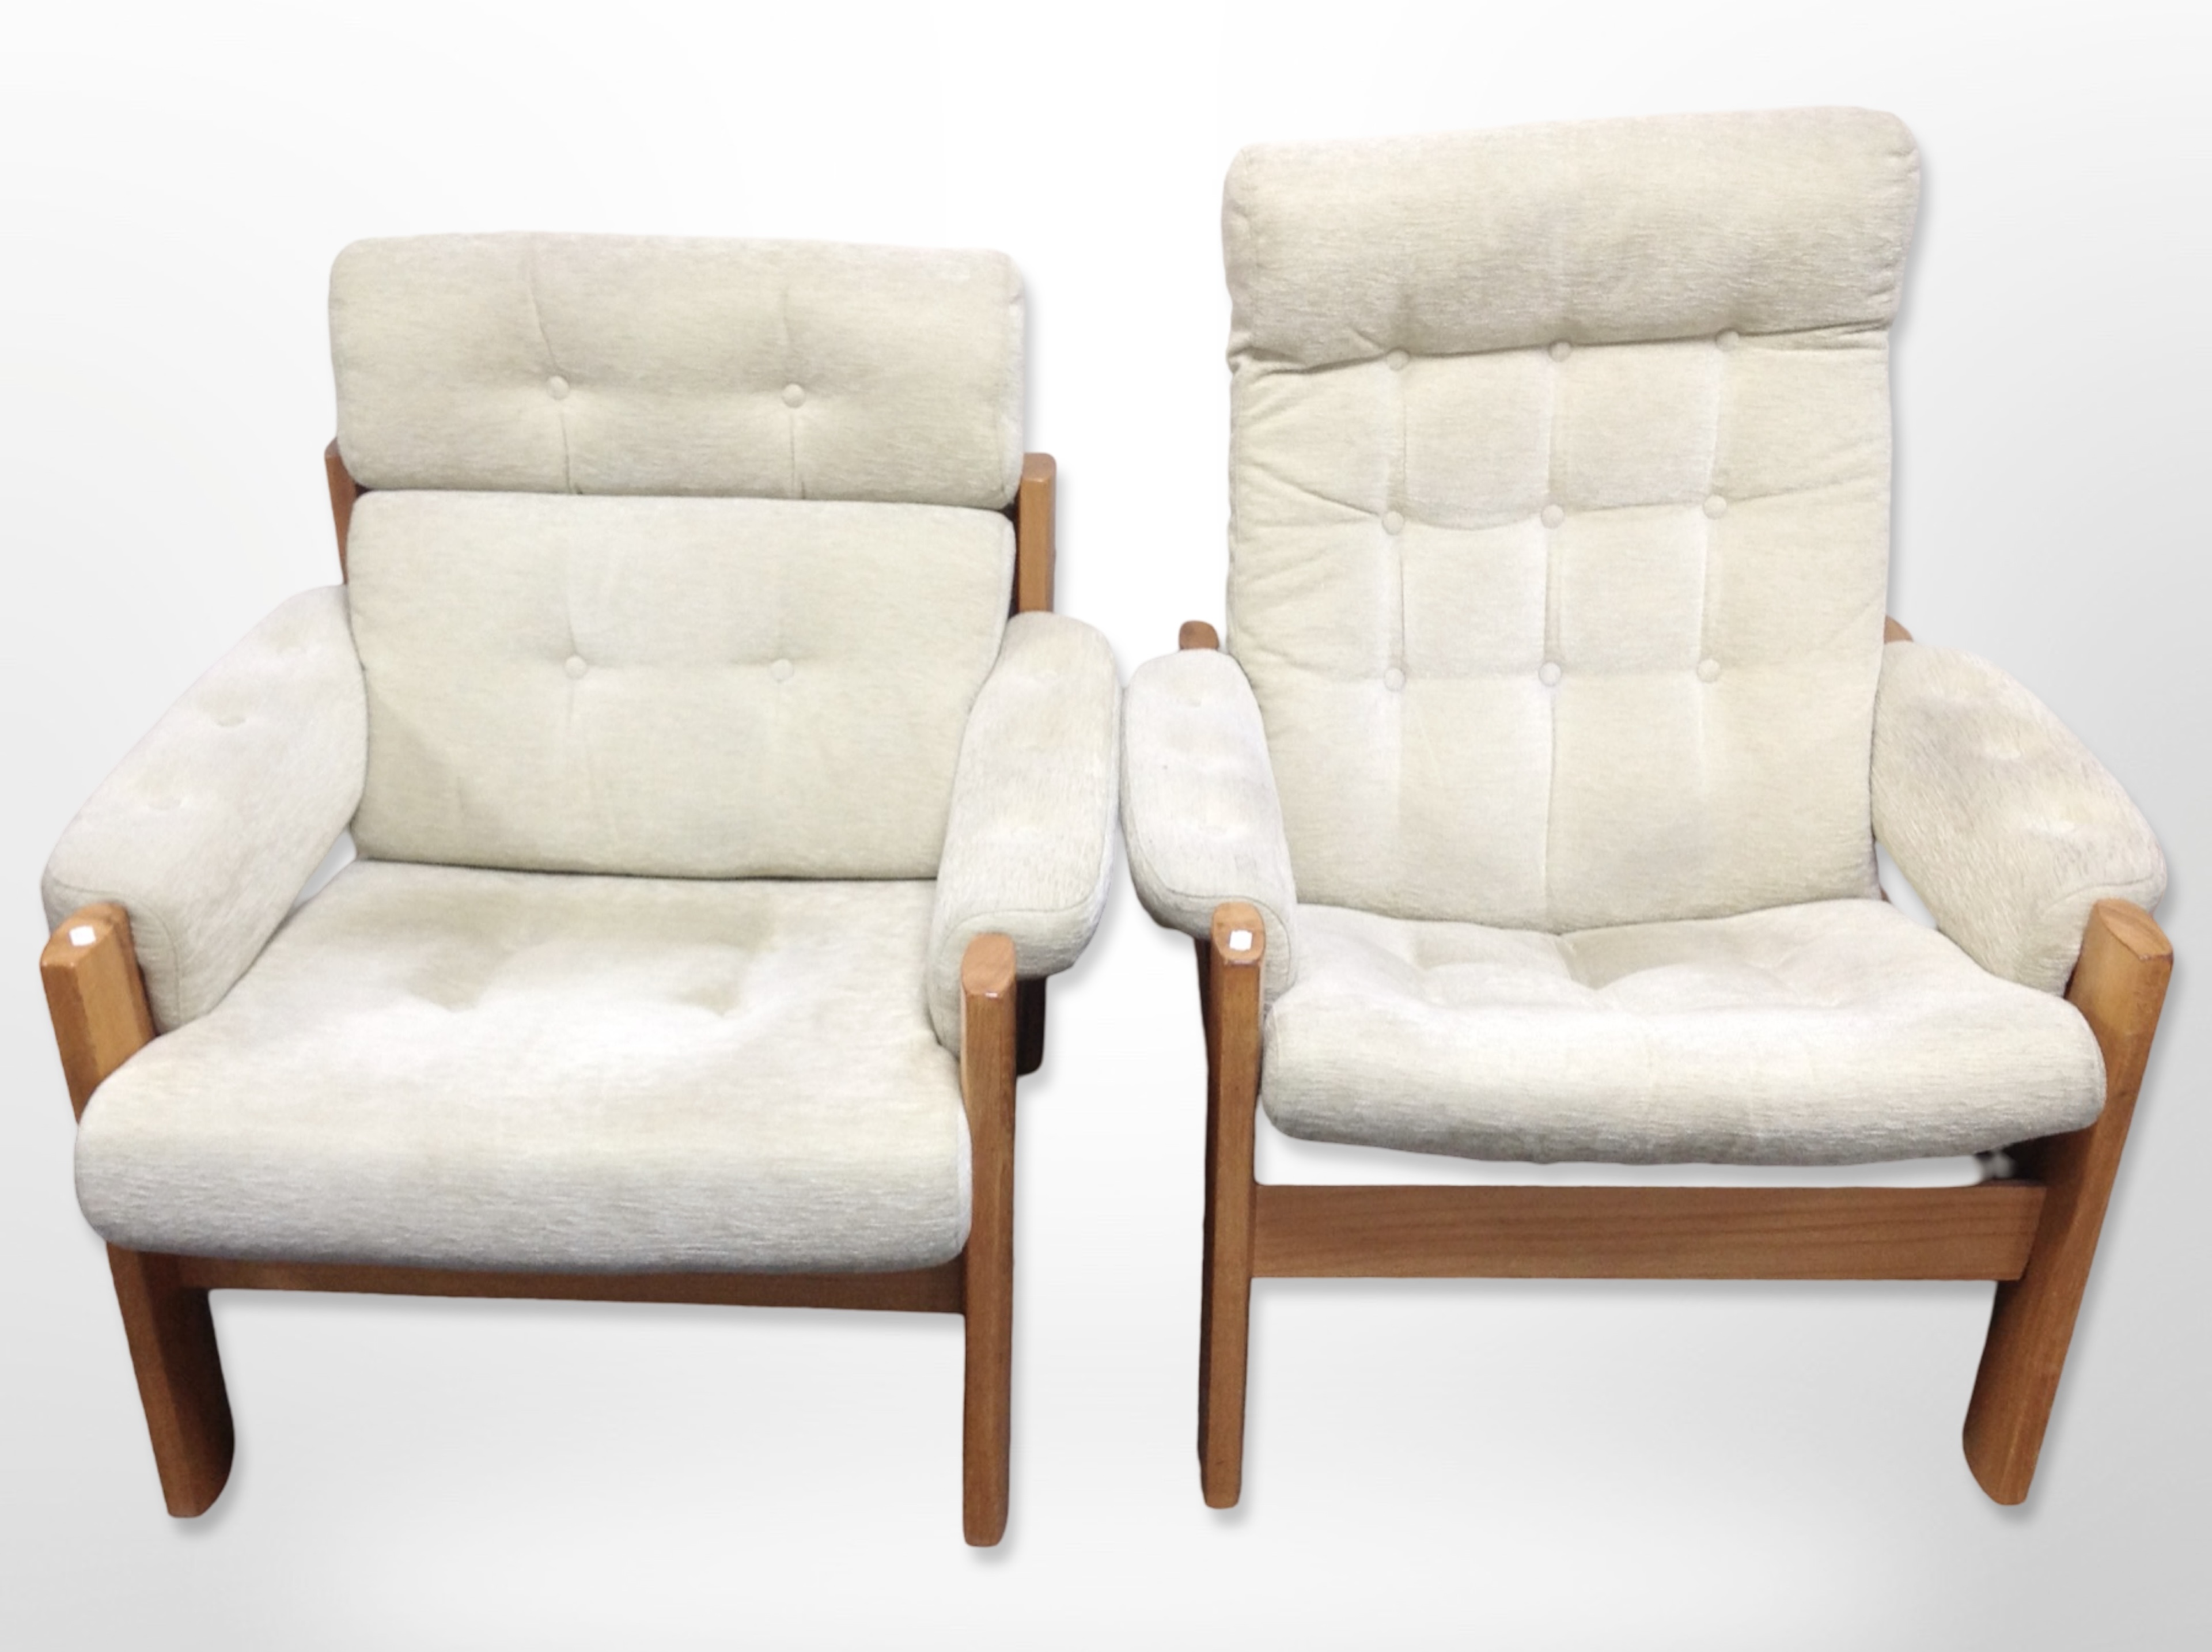 A 20th-century wooden-framed three-piece lounge suite, in buttoned beige upholstery, - Image 2 of 2